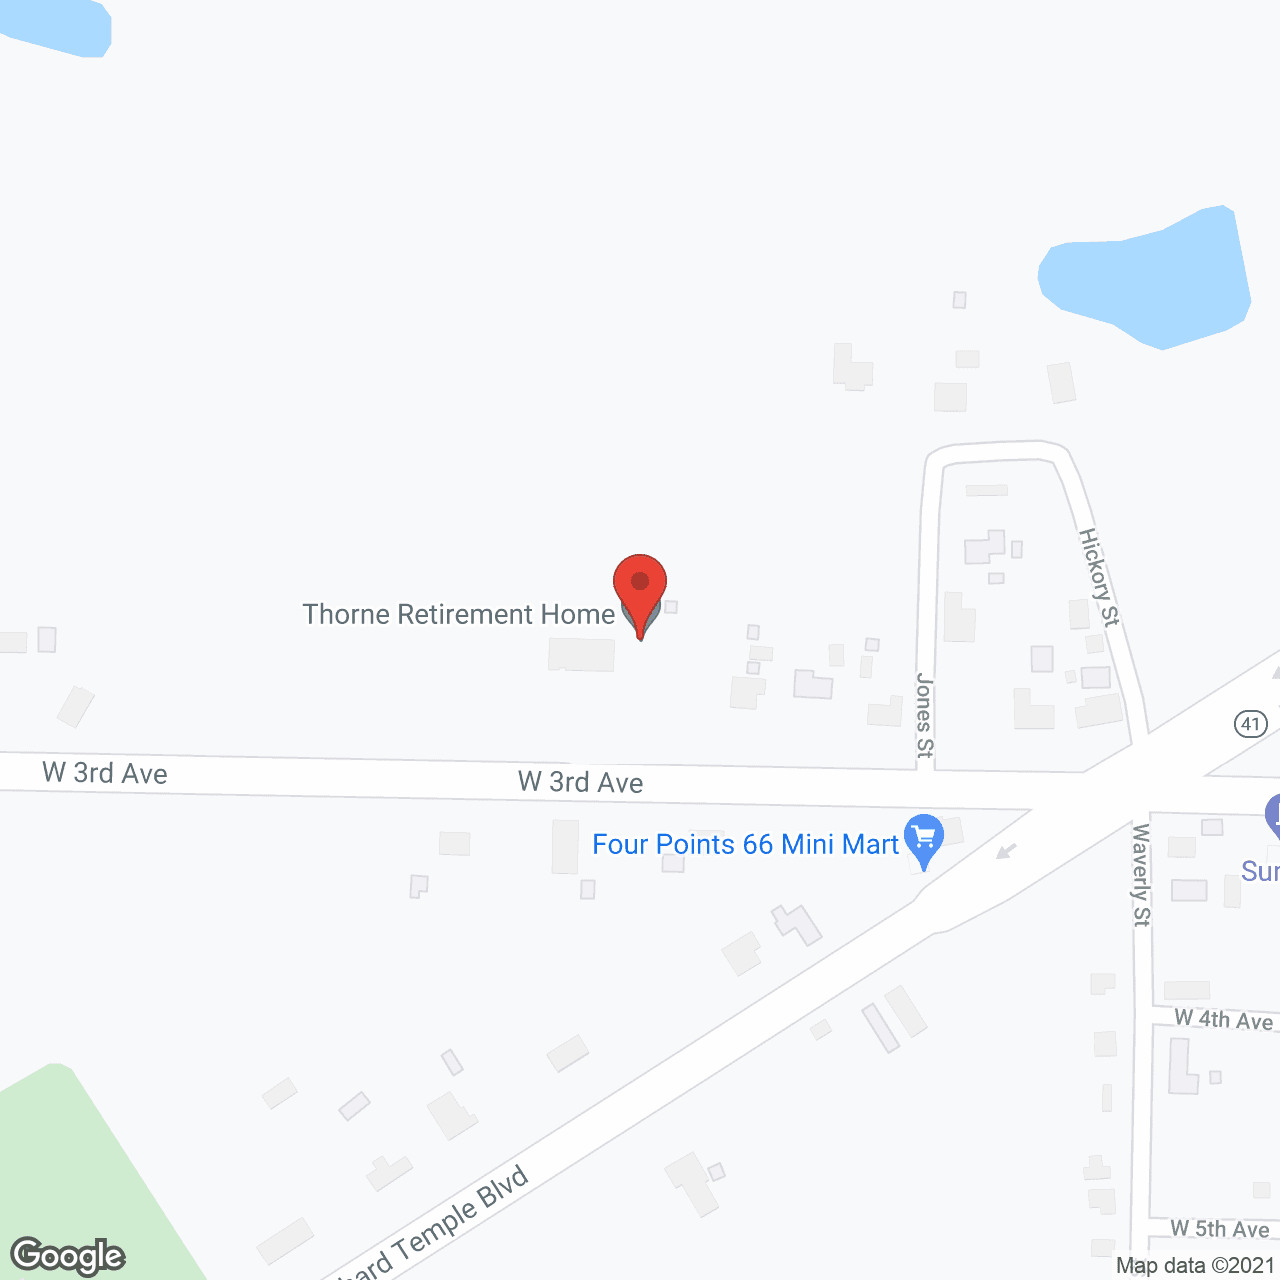 Thorne Retirement Home in google map